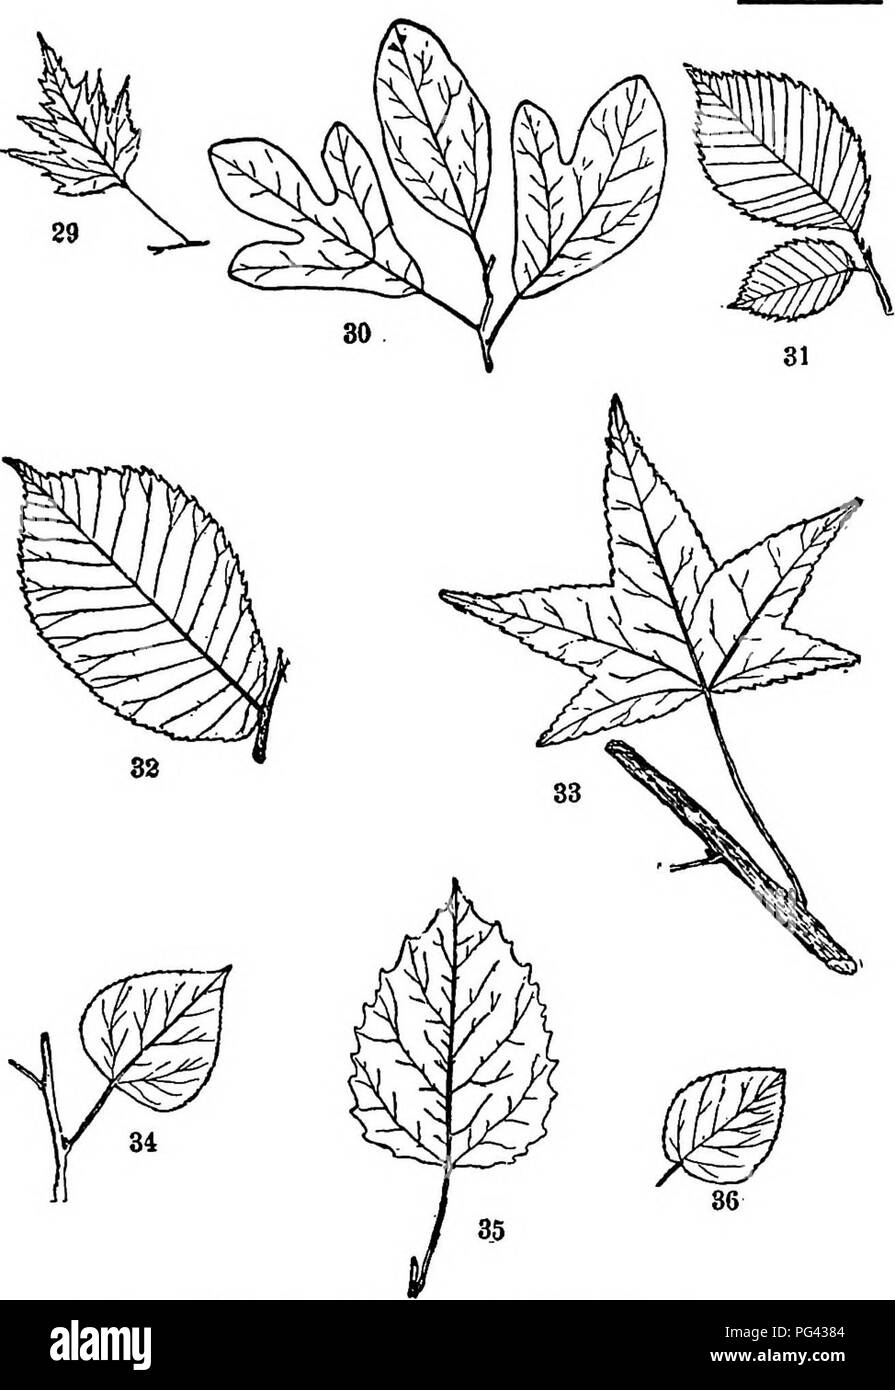 . Trees, shrubs and vines of the northeastern United States : their characteristic landscape features fully described for identification by the non-botanical reader ; together with an account of the principal foreign hardy trees, shrubs and vines cultivated in our country, and found in Central Park, New York City . Trees; Shrubs; Parks. PLATE V. 39. Cut-leaved Birch. 90. (V3) 30. Sassafras. I3. (Ve) 31. American Elm. 30. O/3) 32. Slippery Elm. 37- (V*) 33. Sweet Gum. 87. (Vb) 34. Common Aspen. 24. ('/^) 35. Large-toothed Aspen. 35. (Vs) 36. Downy-leaved Poplar. a6. (Vg) 203. Please note that t Stock Photo